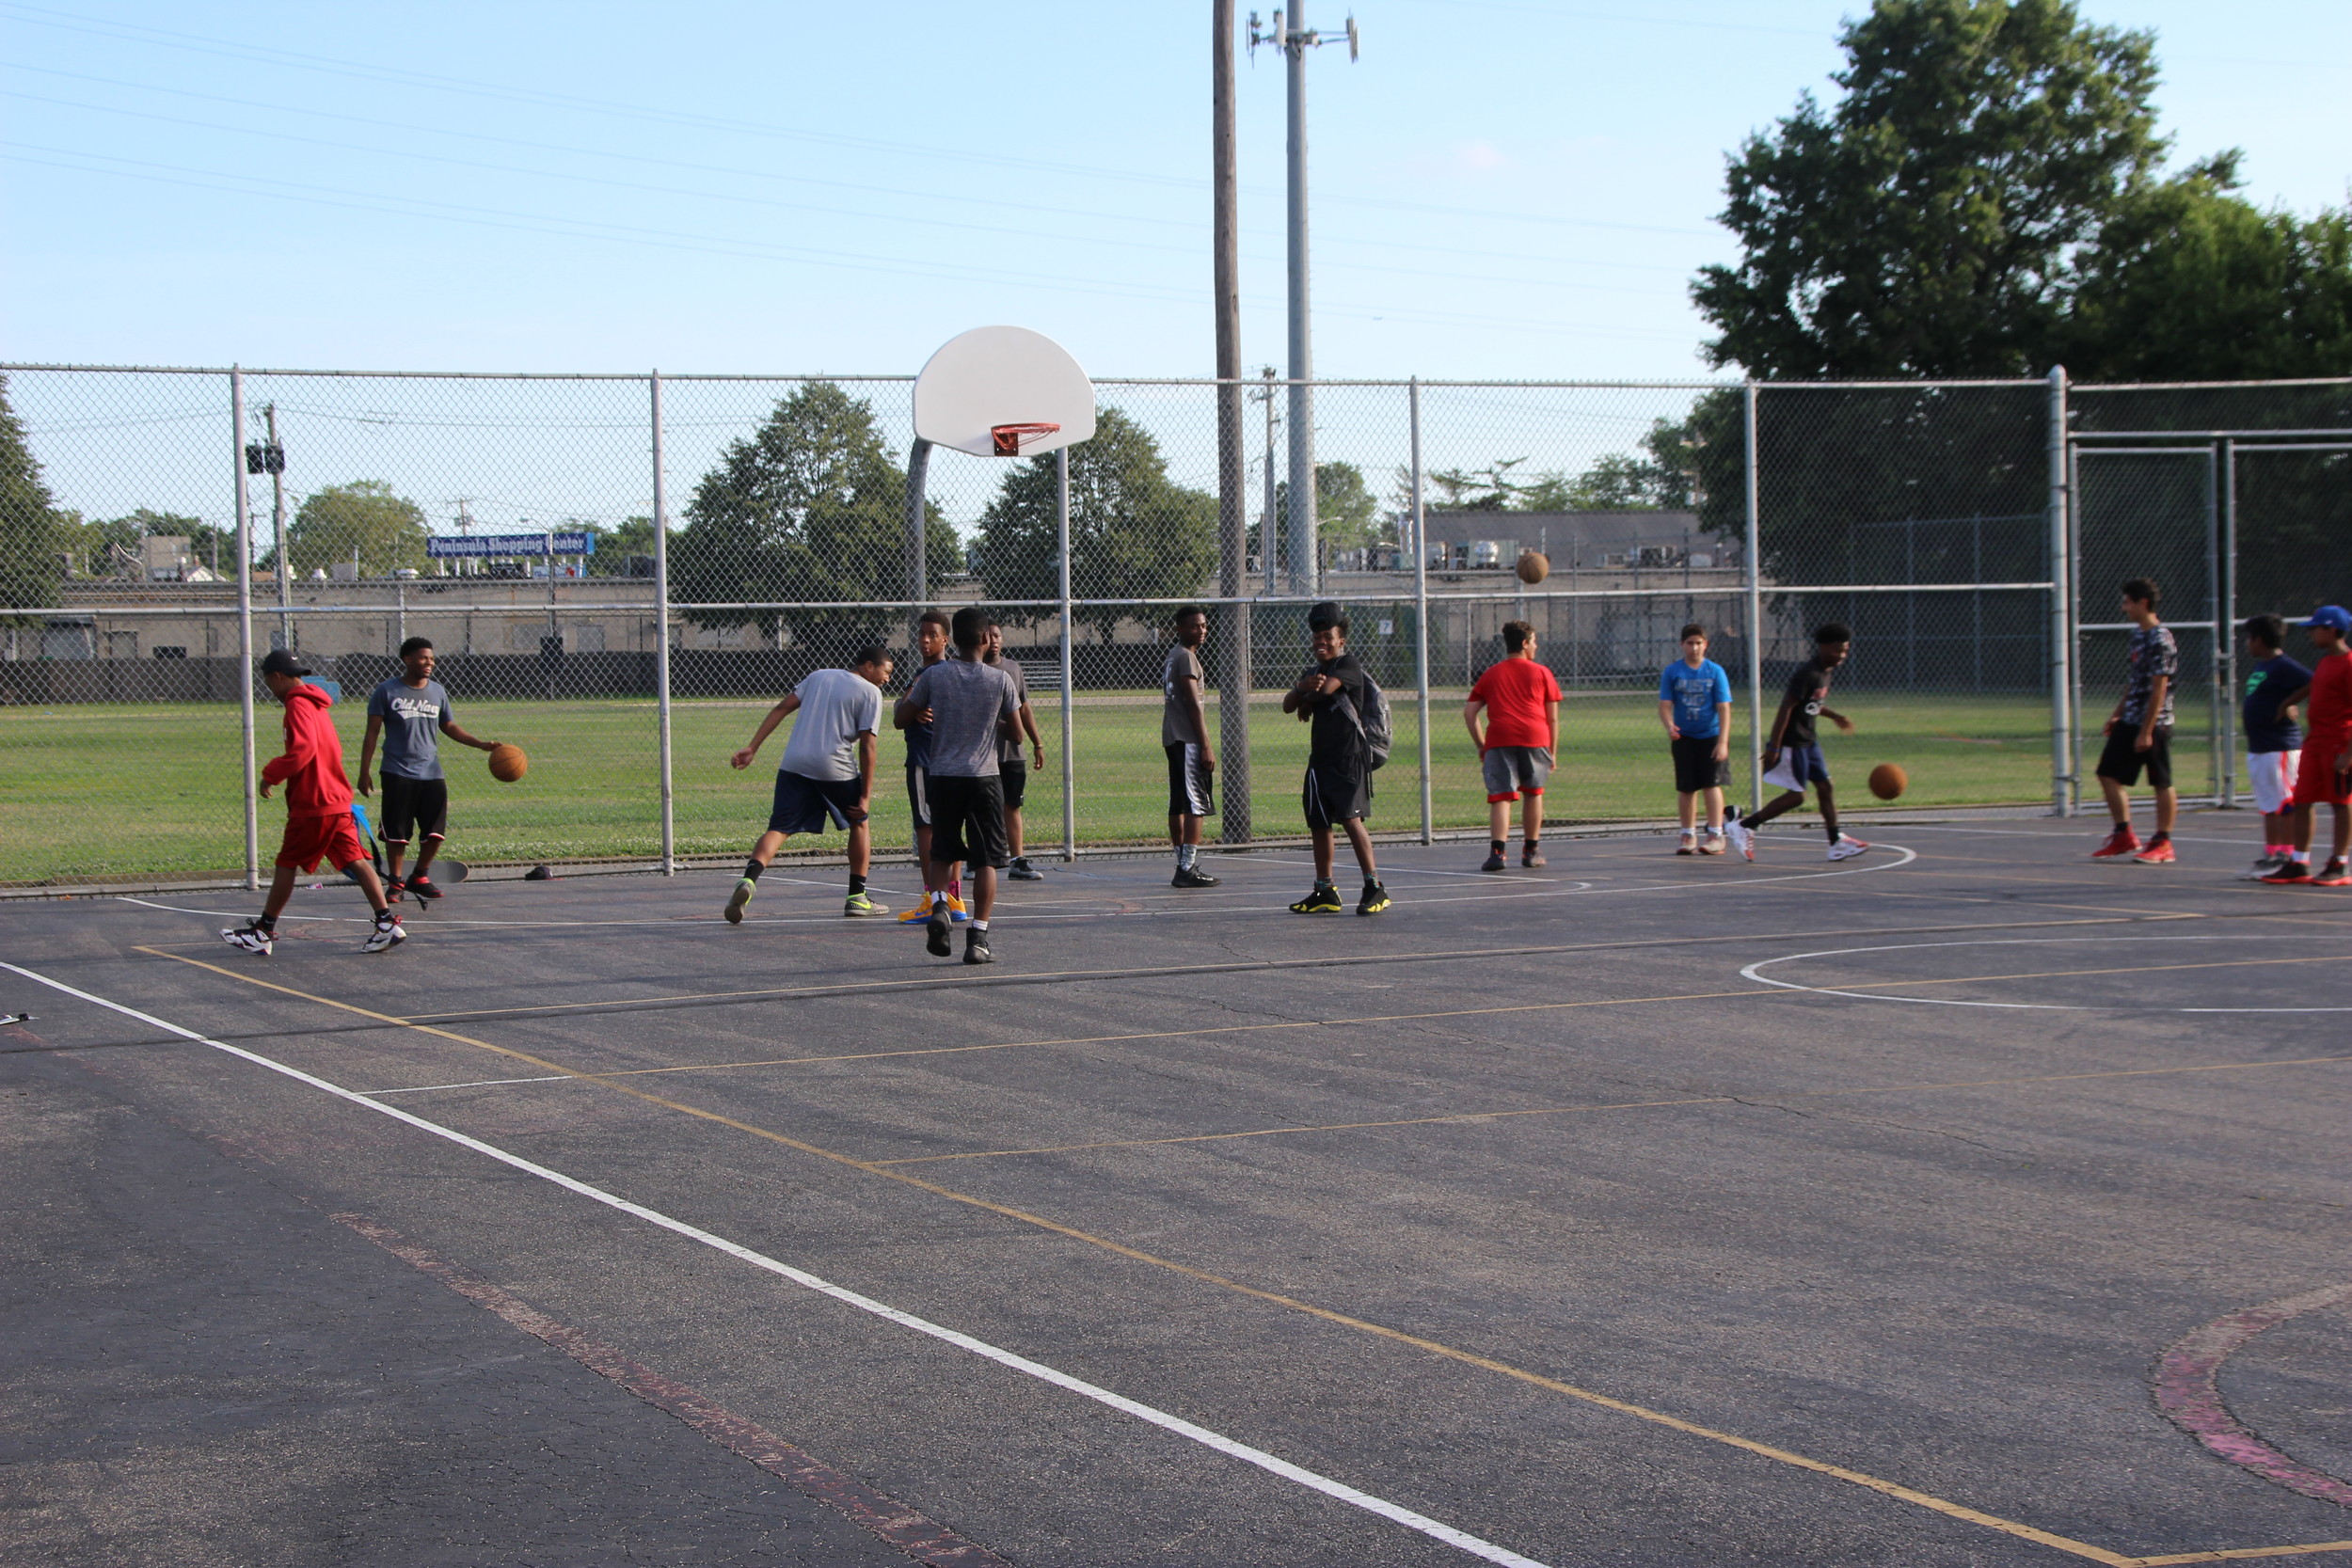 The fields will replace the existing basketball courts, but mobile hoops will be added.